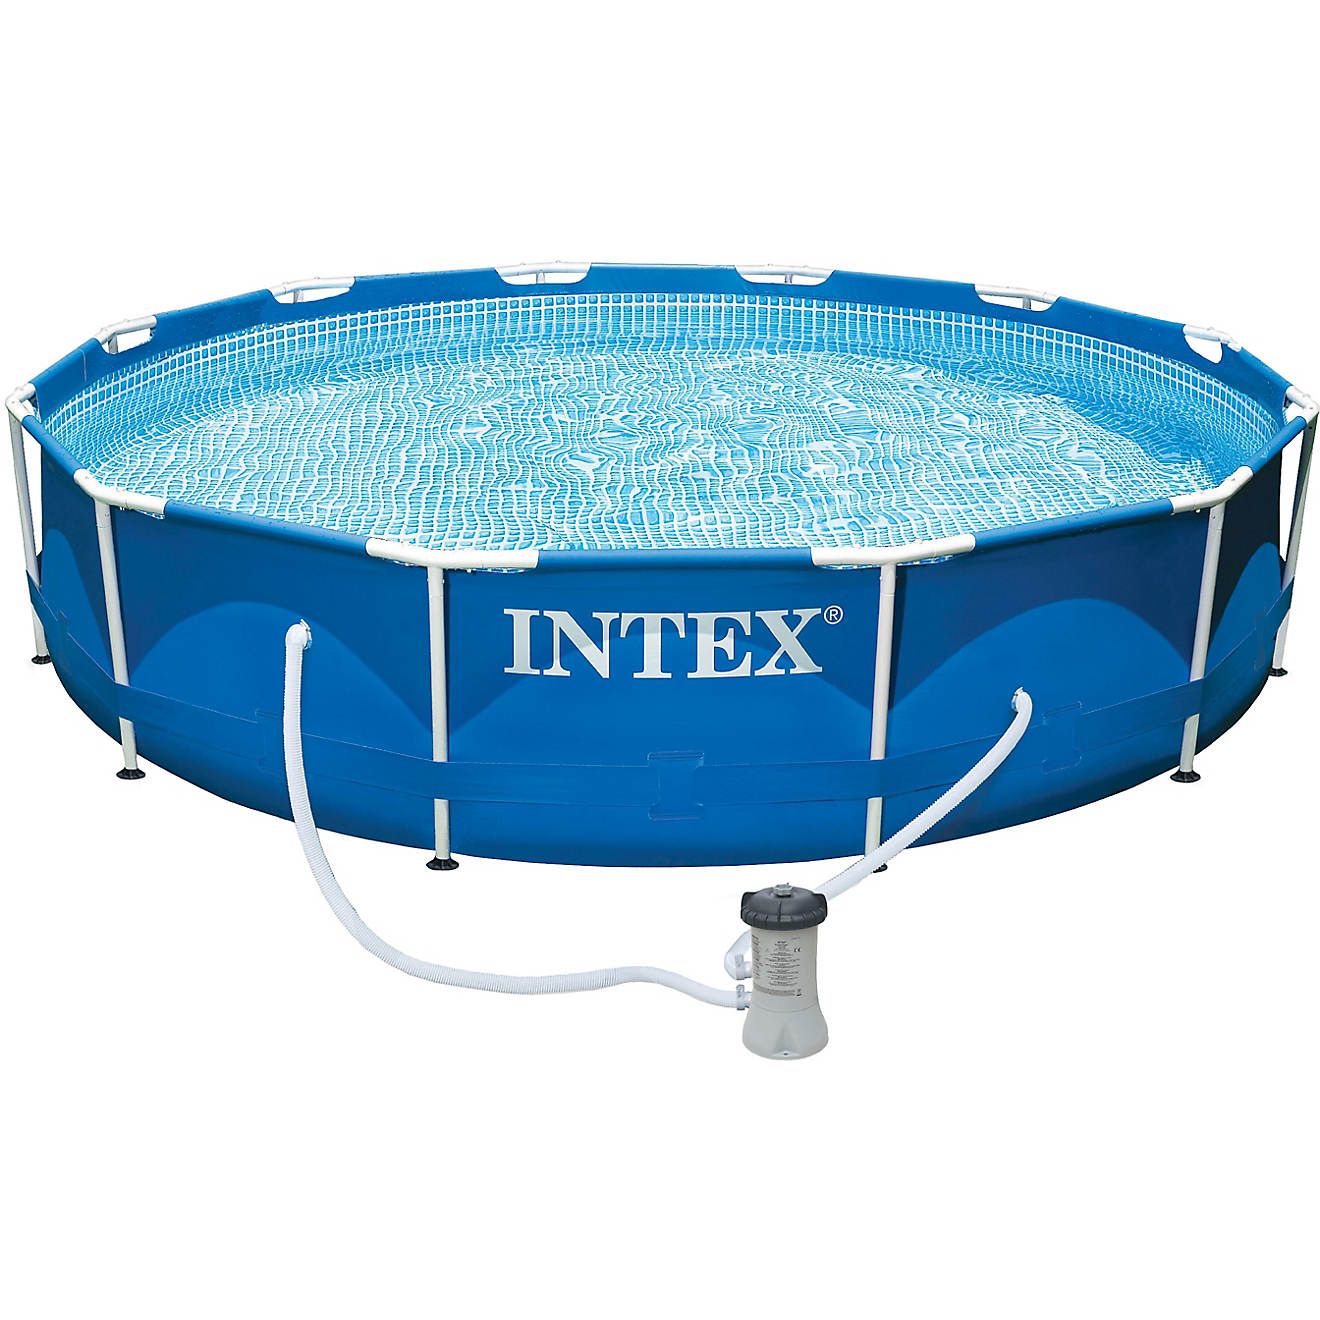 INTEX 12ft x 30in Round Metal Frame Pool Set | Academy Sports + Outdoors